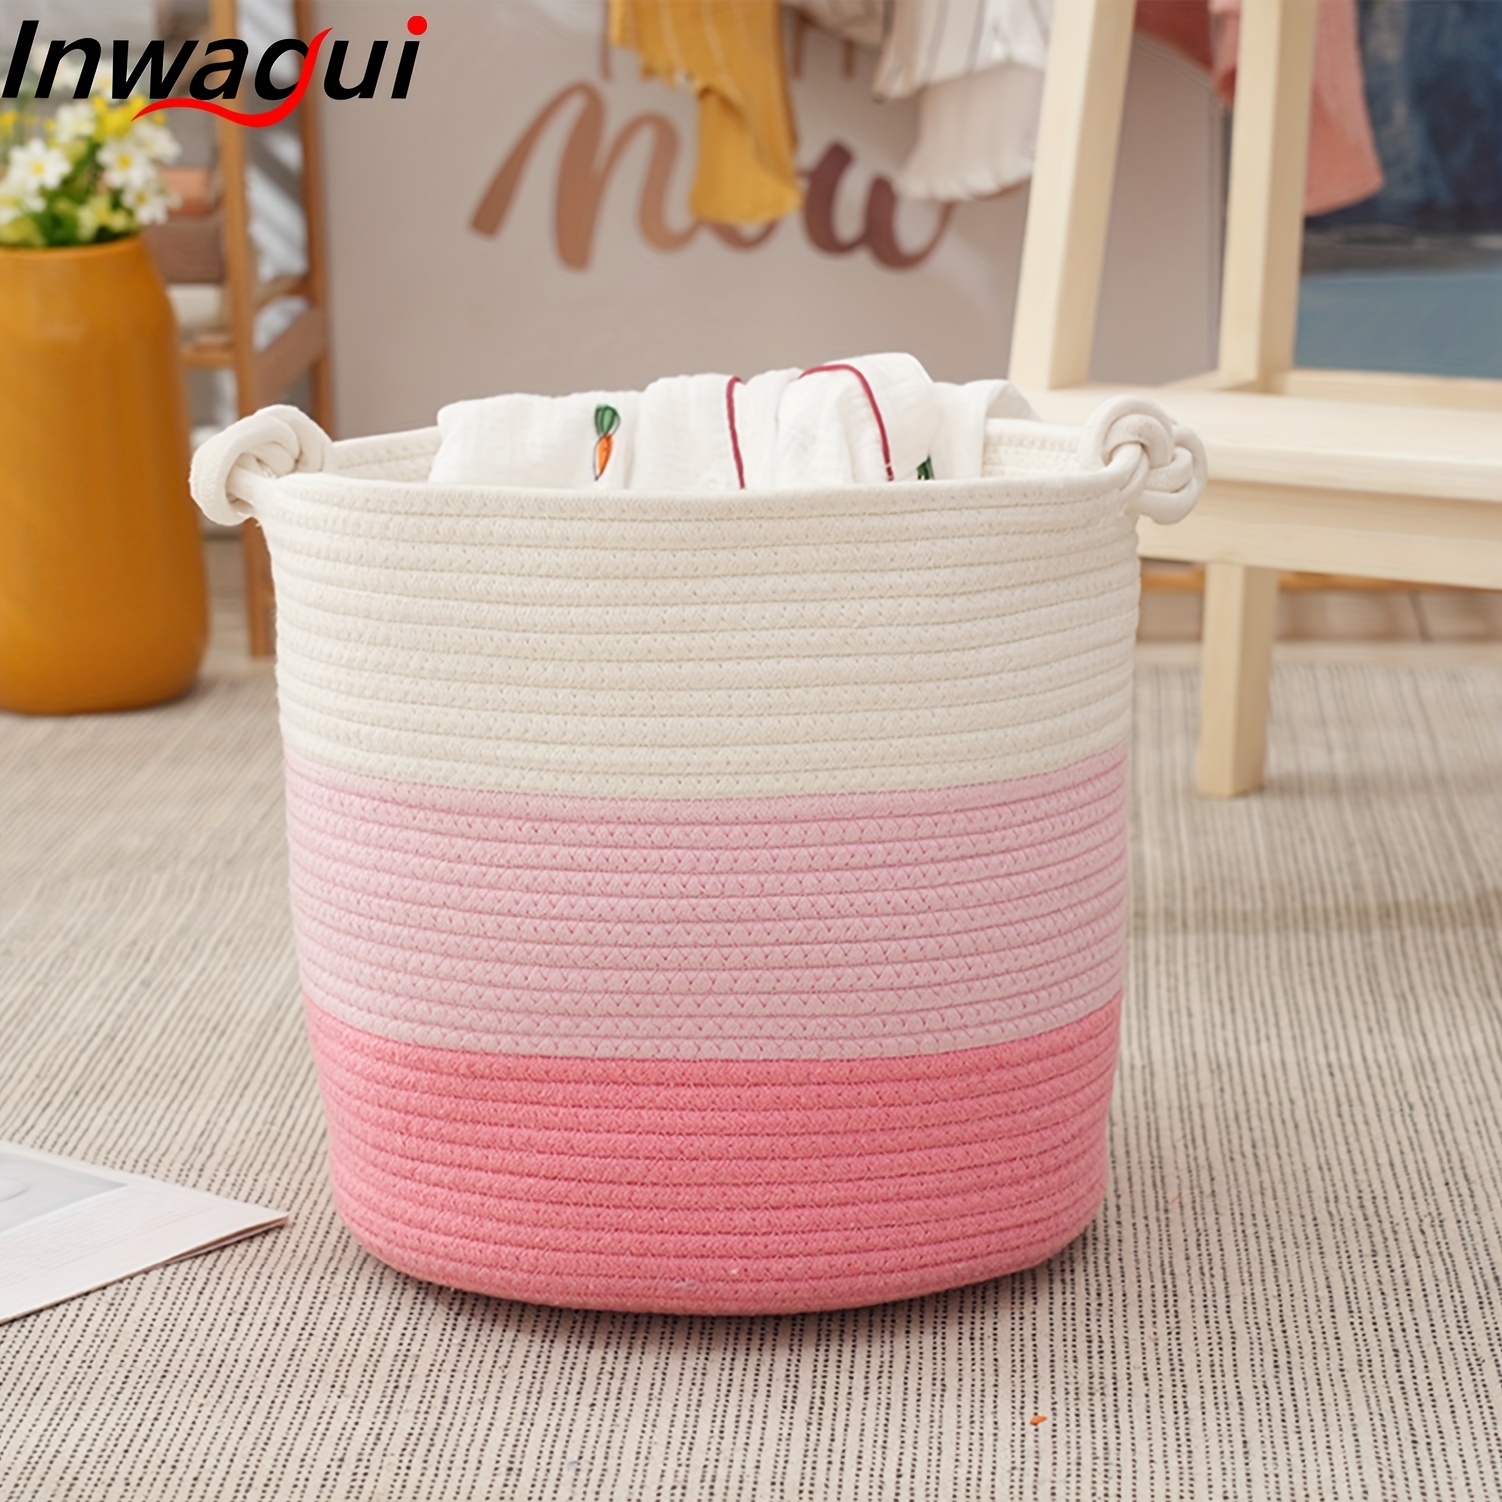 1pc Woven Rope Storage Basket With Handles, Pink And White Fabric Storage Bin For Clothes, Blankets, Toys, And More, Stylish And Durable Home Organizer, 11.8x11.8 Inches, Medium